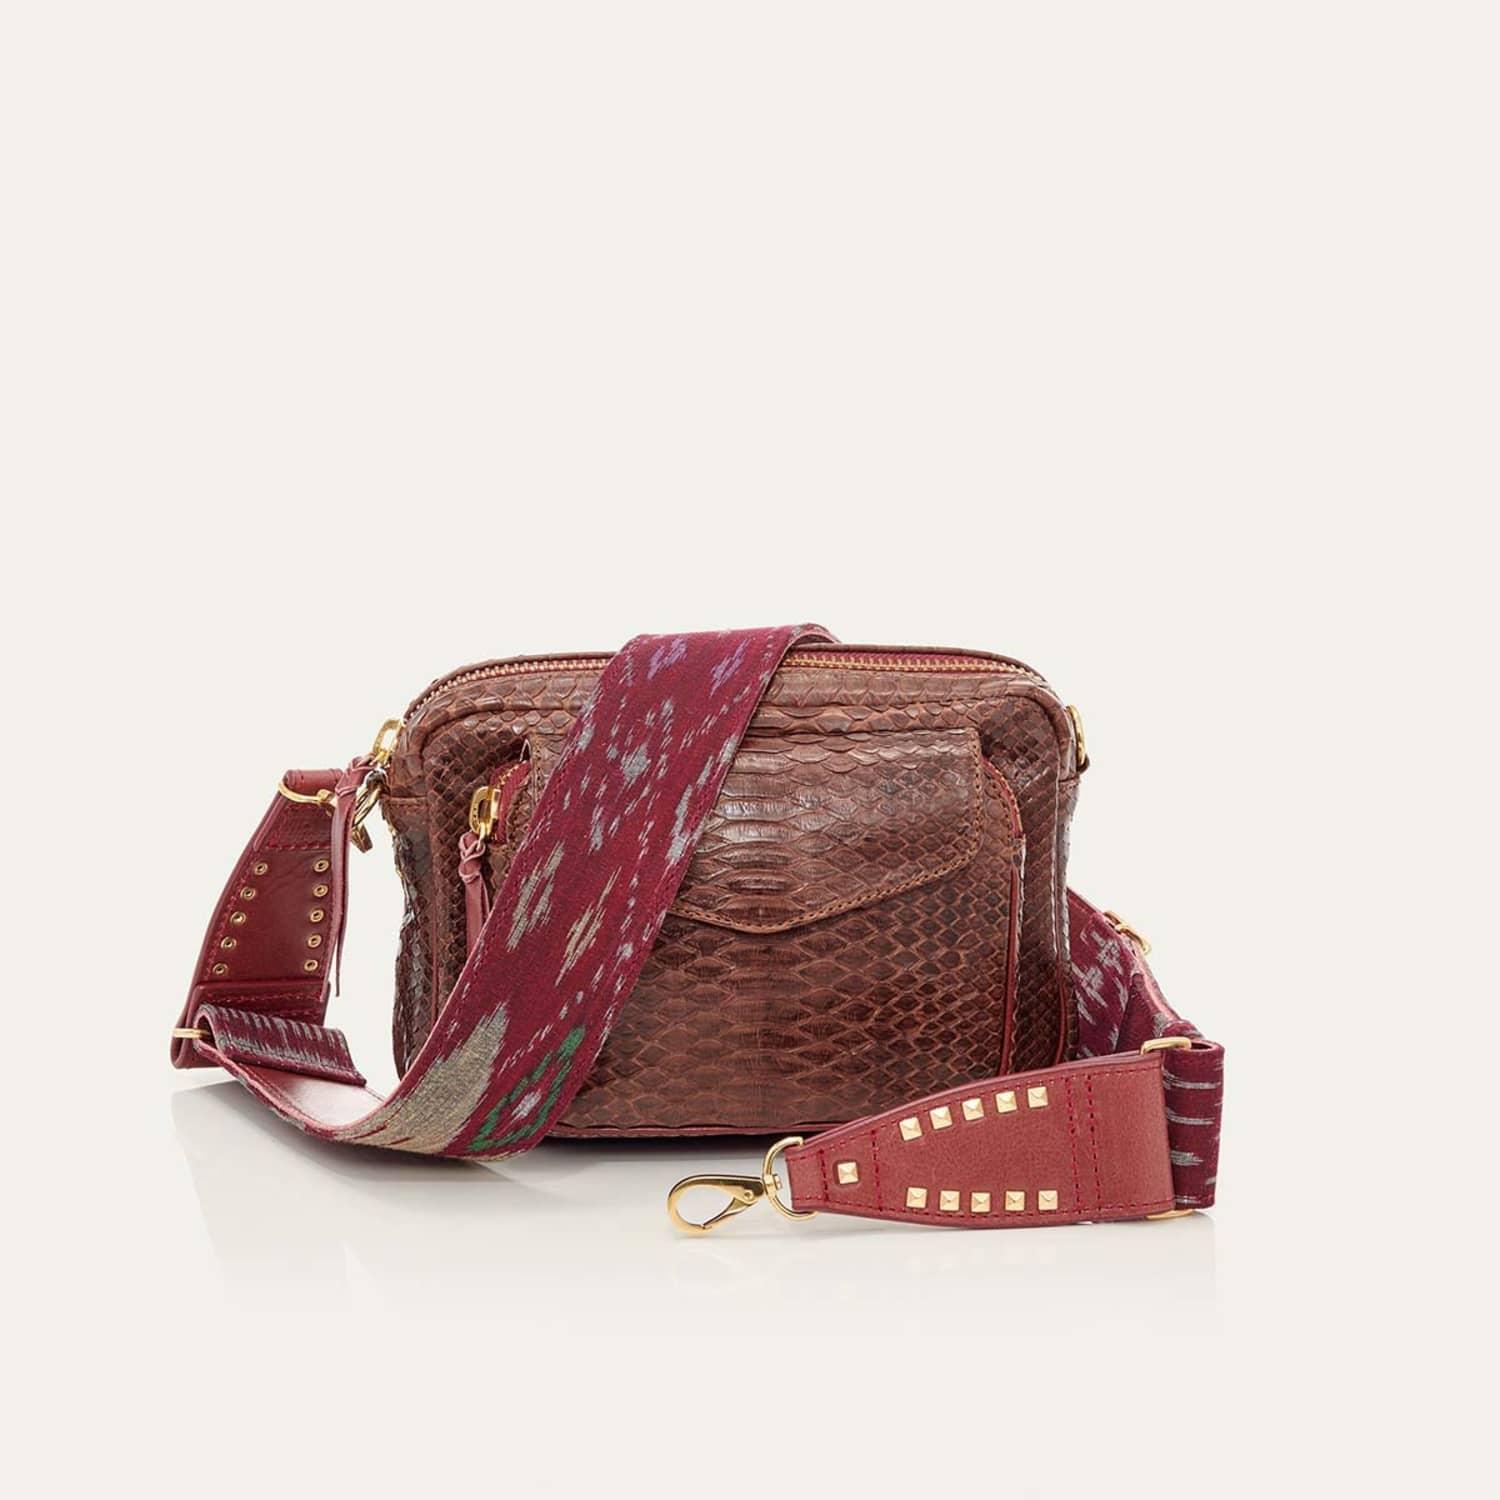 Claris Virot Choco Python Bag Charly With Endek Strap in Red | Lyst